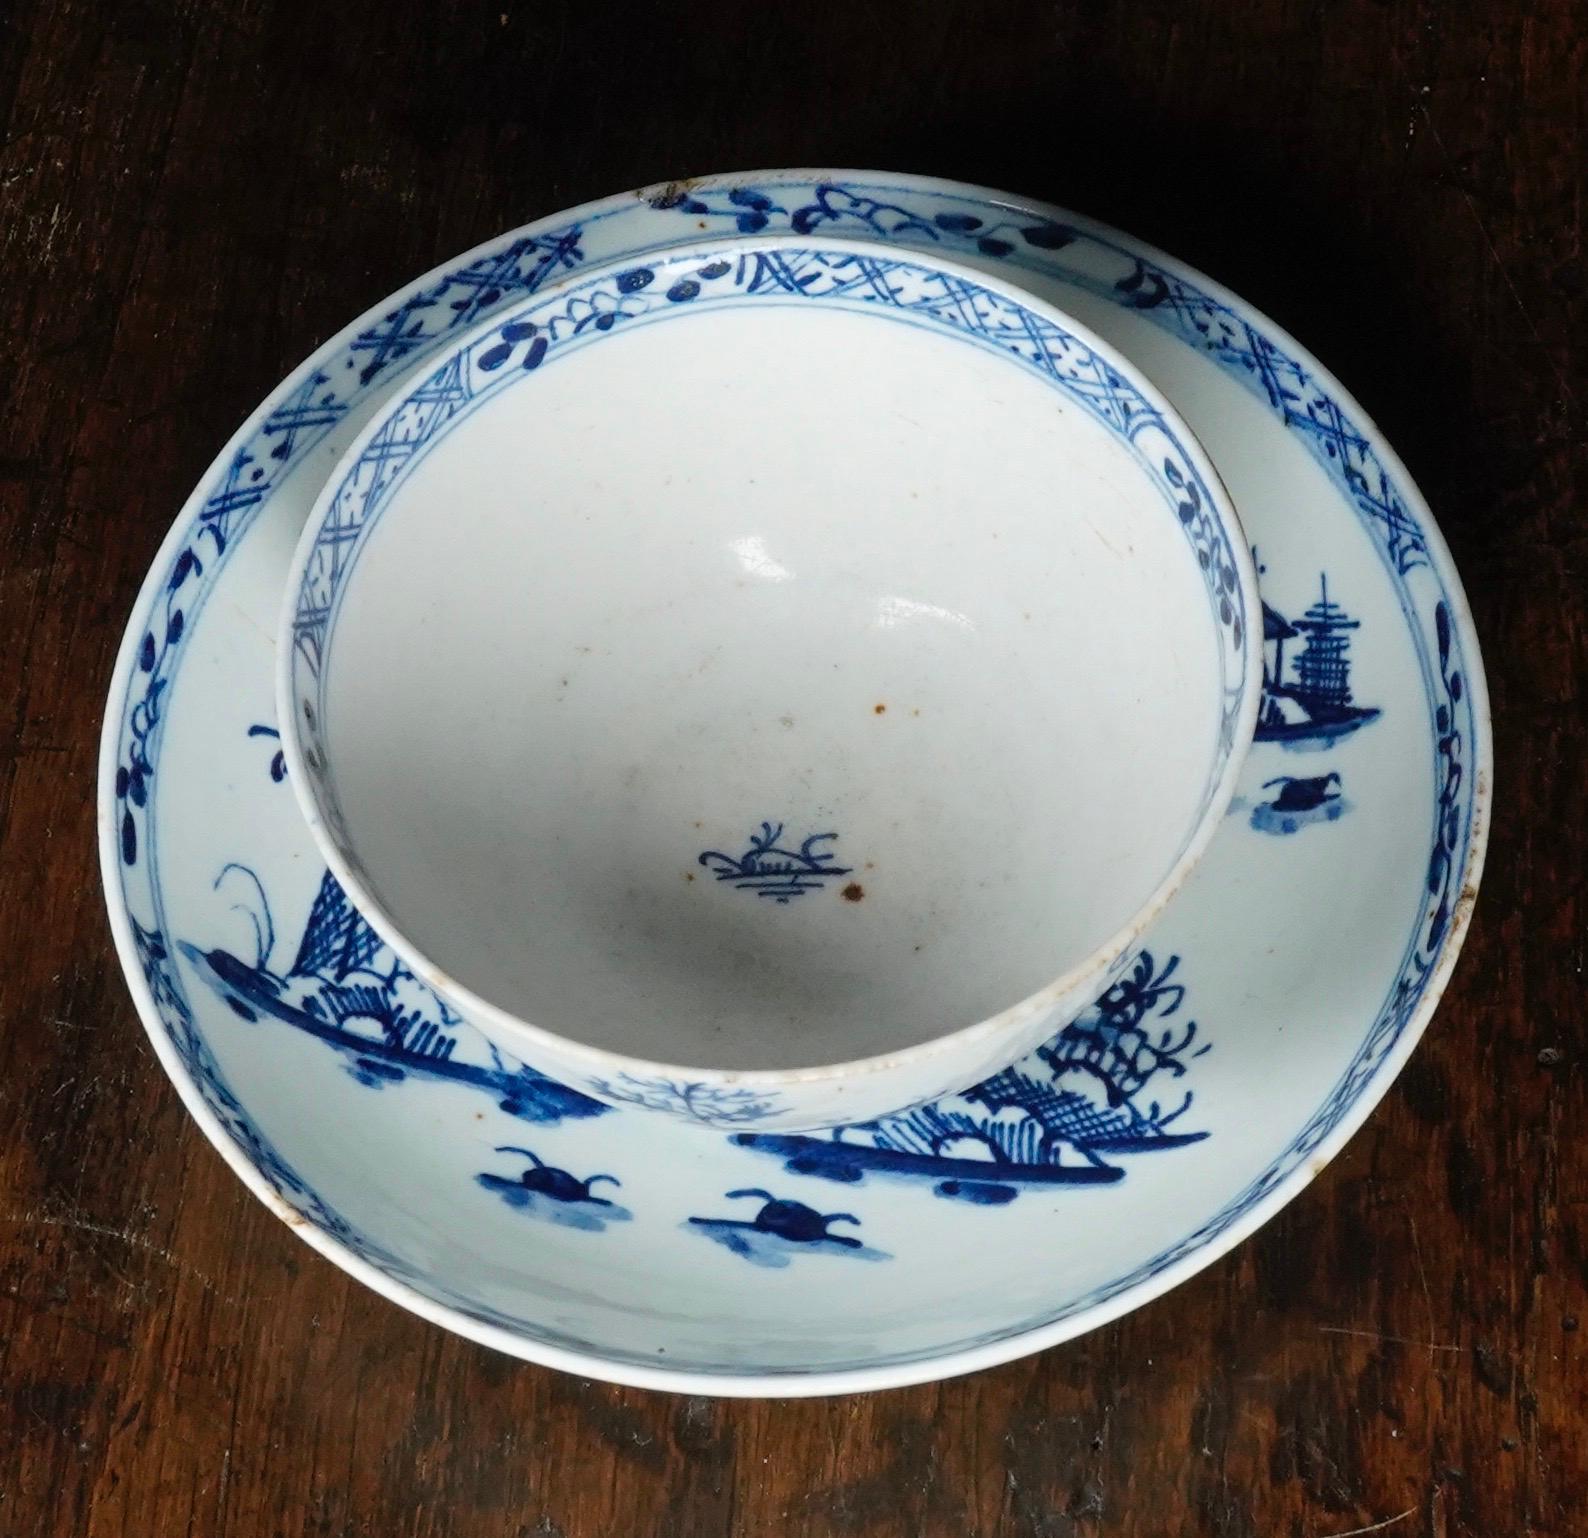 Porcelain Lowestoft Teabowl and Saucer, Blue Chinoiserie 'Long Bridge' Pattern, circa 1760 For Sale